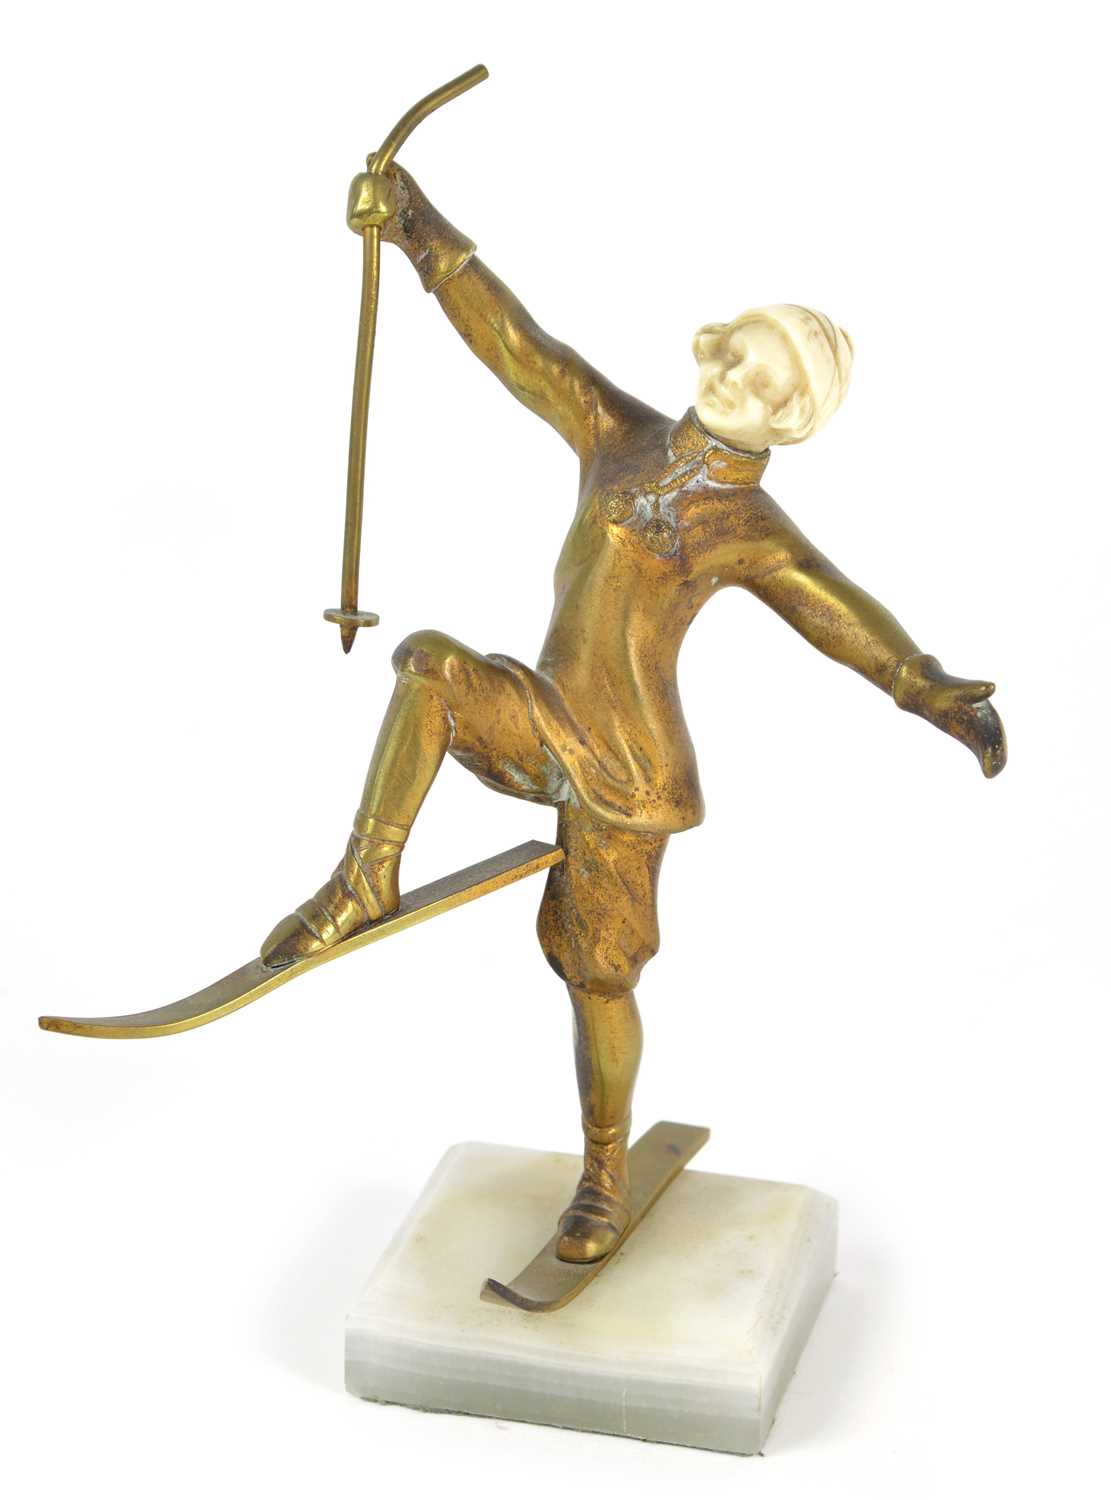 Lot 161 - Bronze and Ivory Figure of a Skier